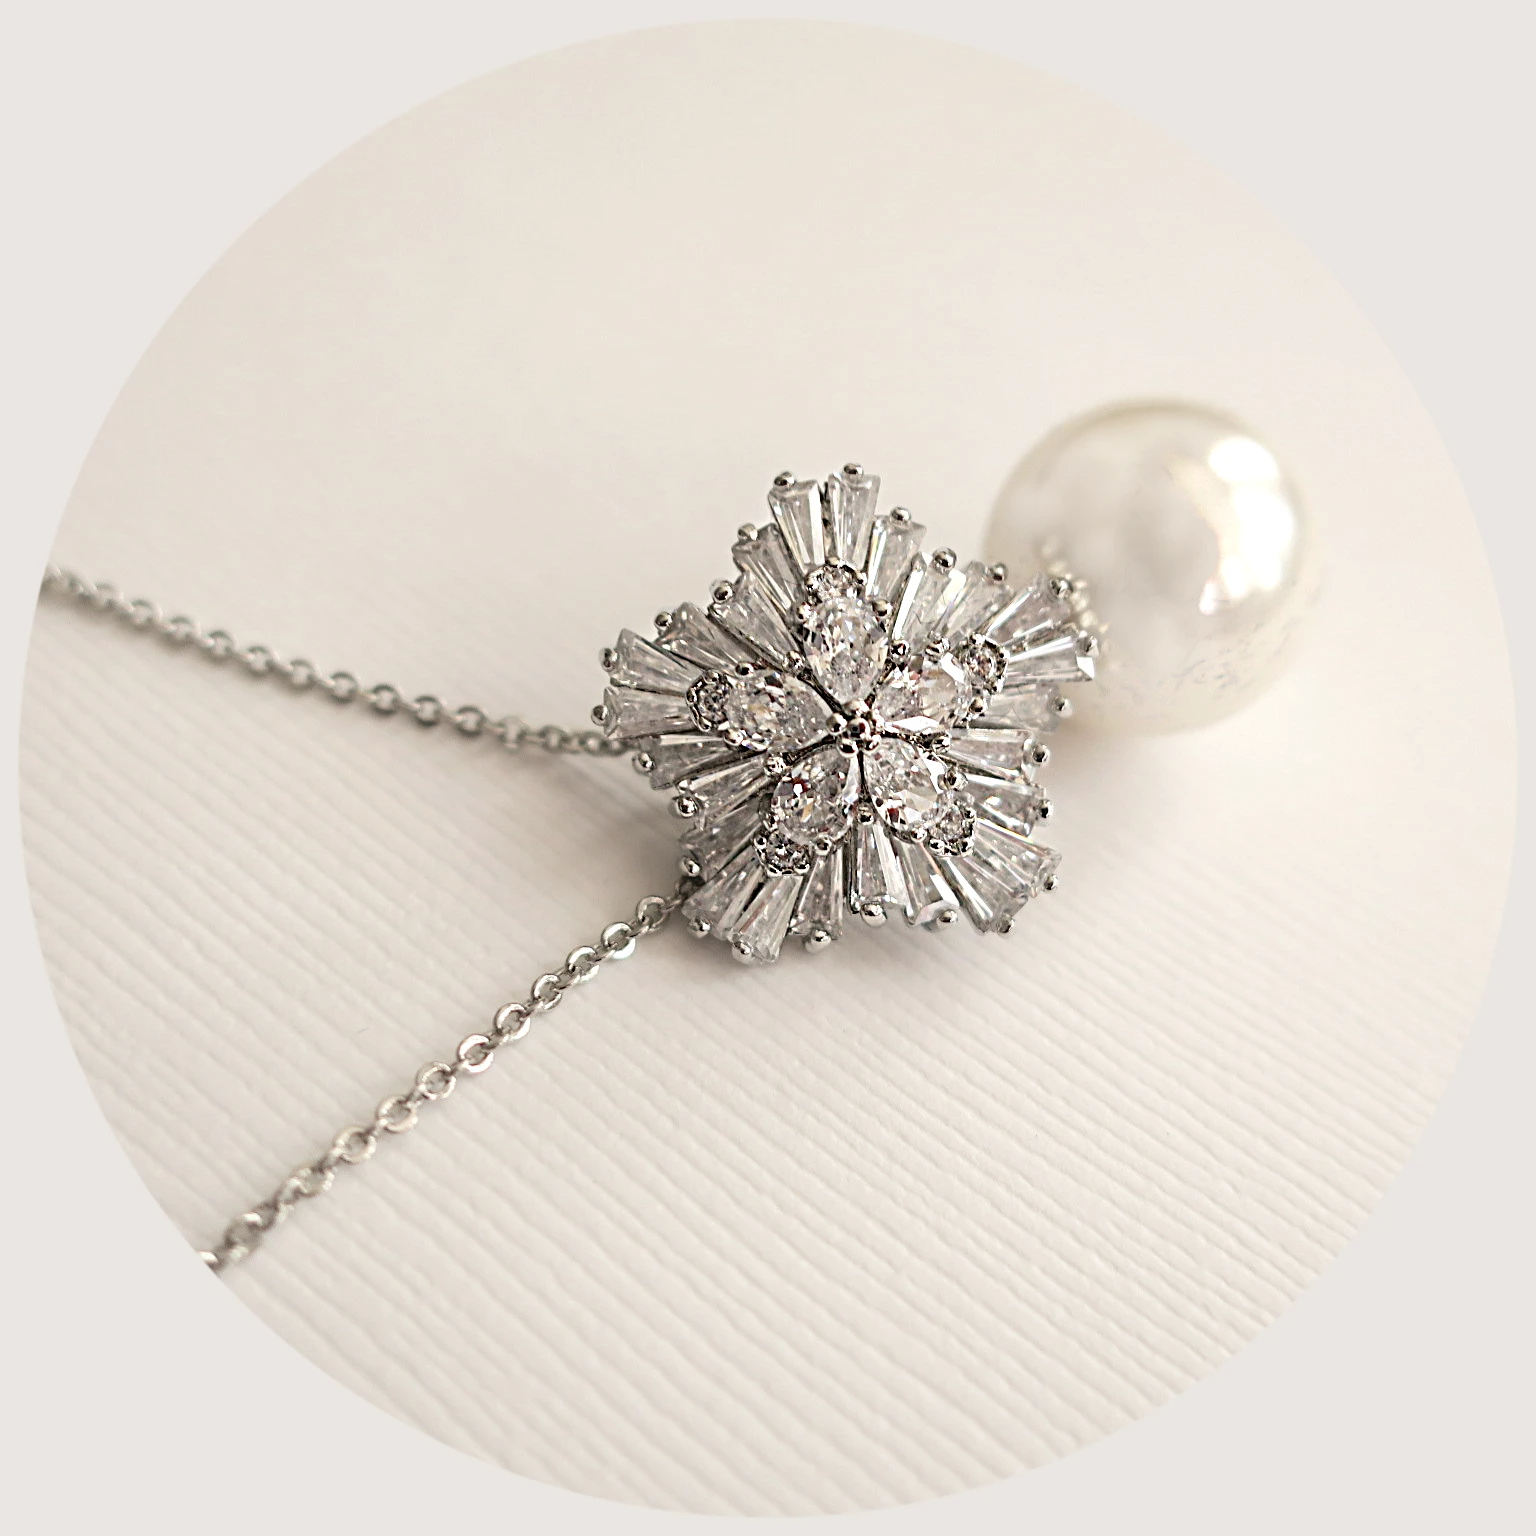 Elegant white ivory pearl drop and cubic zirconia snowflake necklace with a silver finish and adjustable chain, perfect for bridal and formal occasions